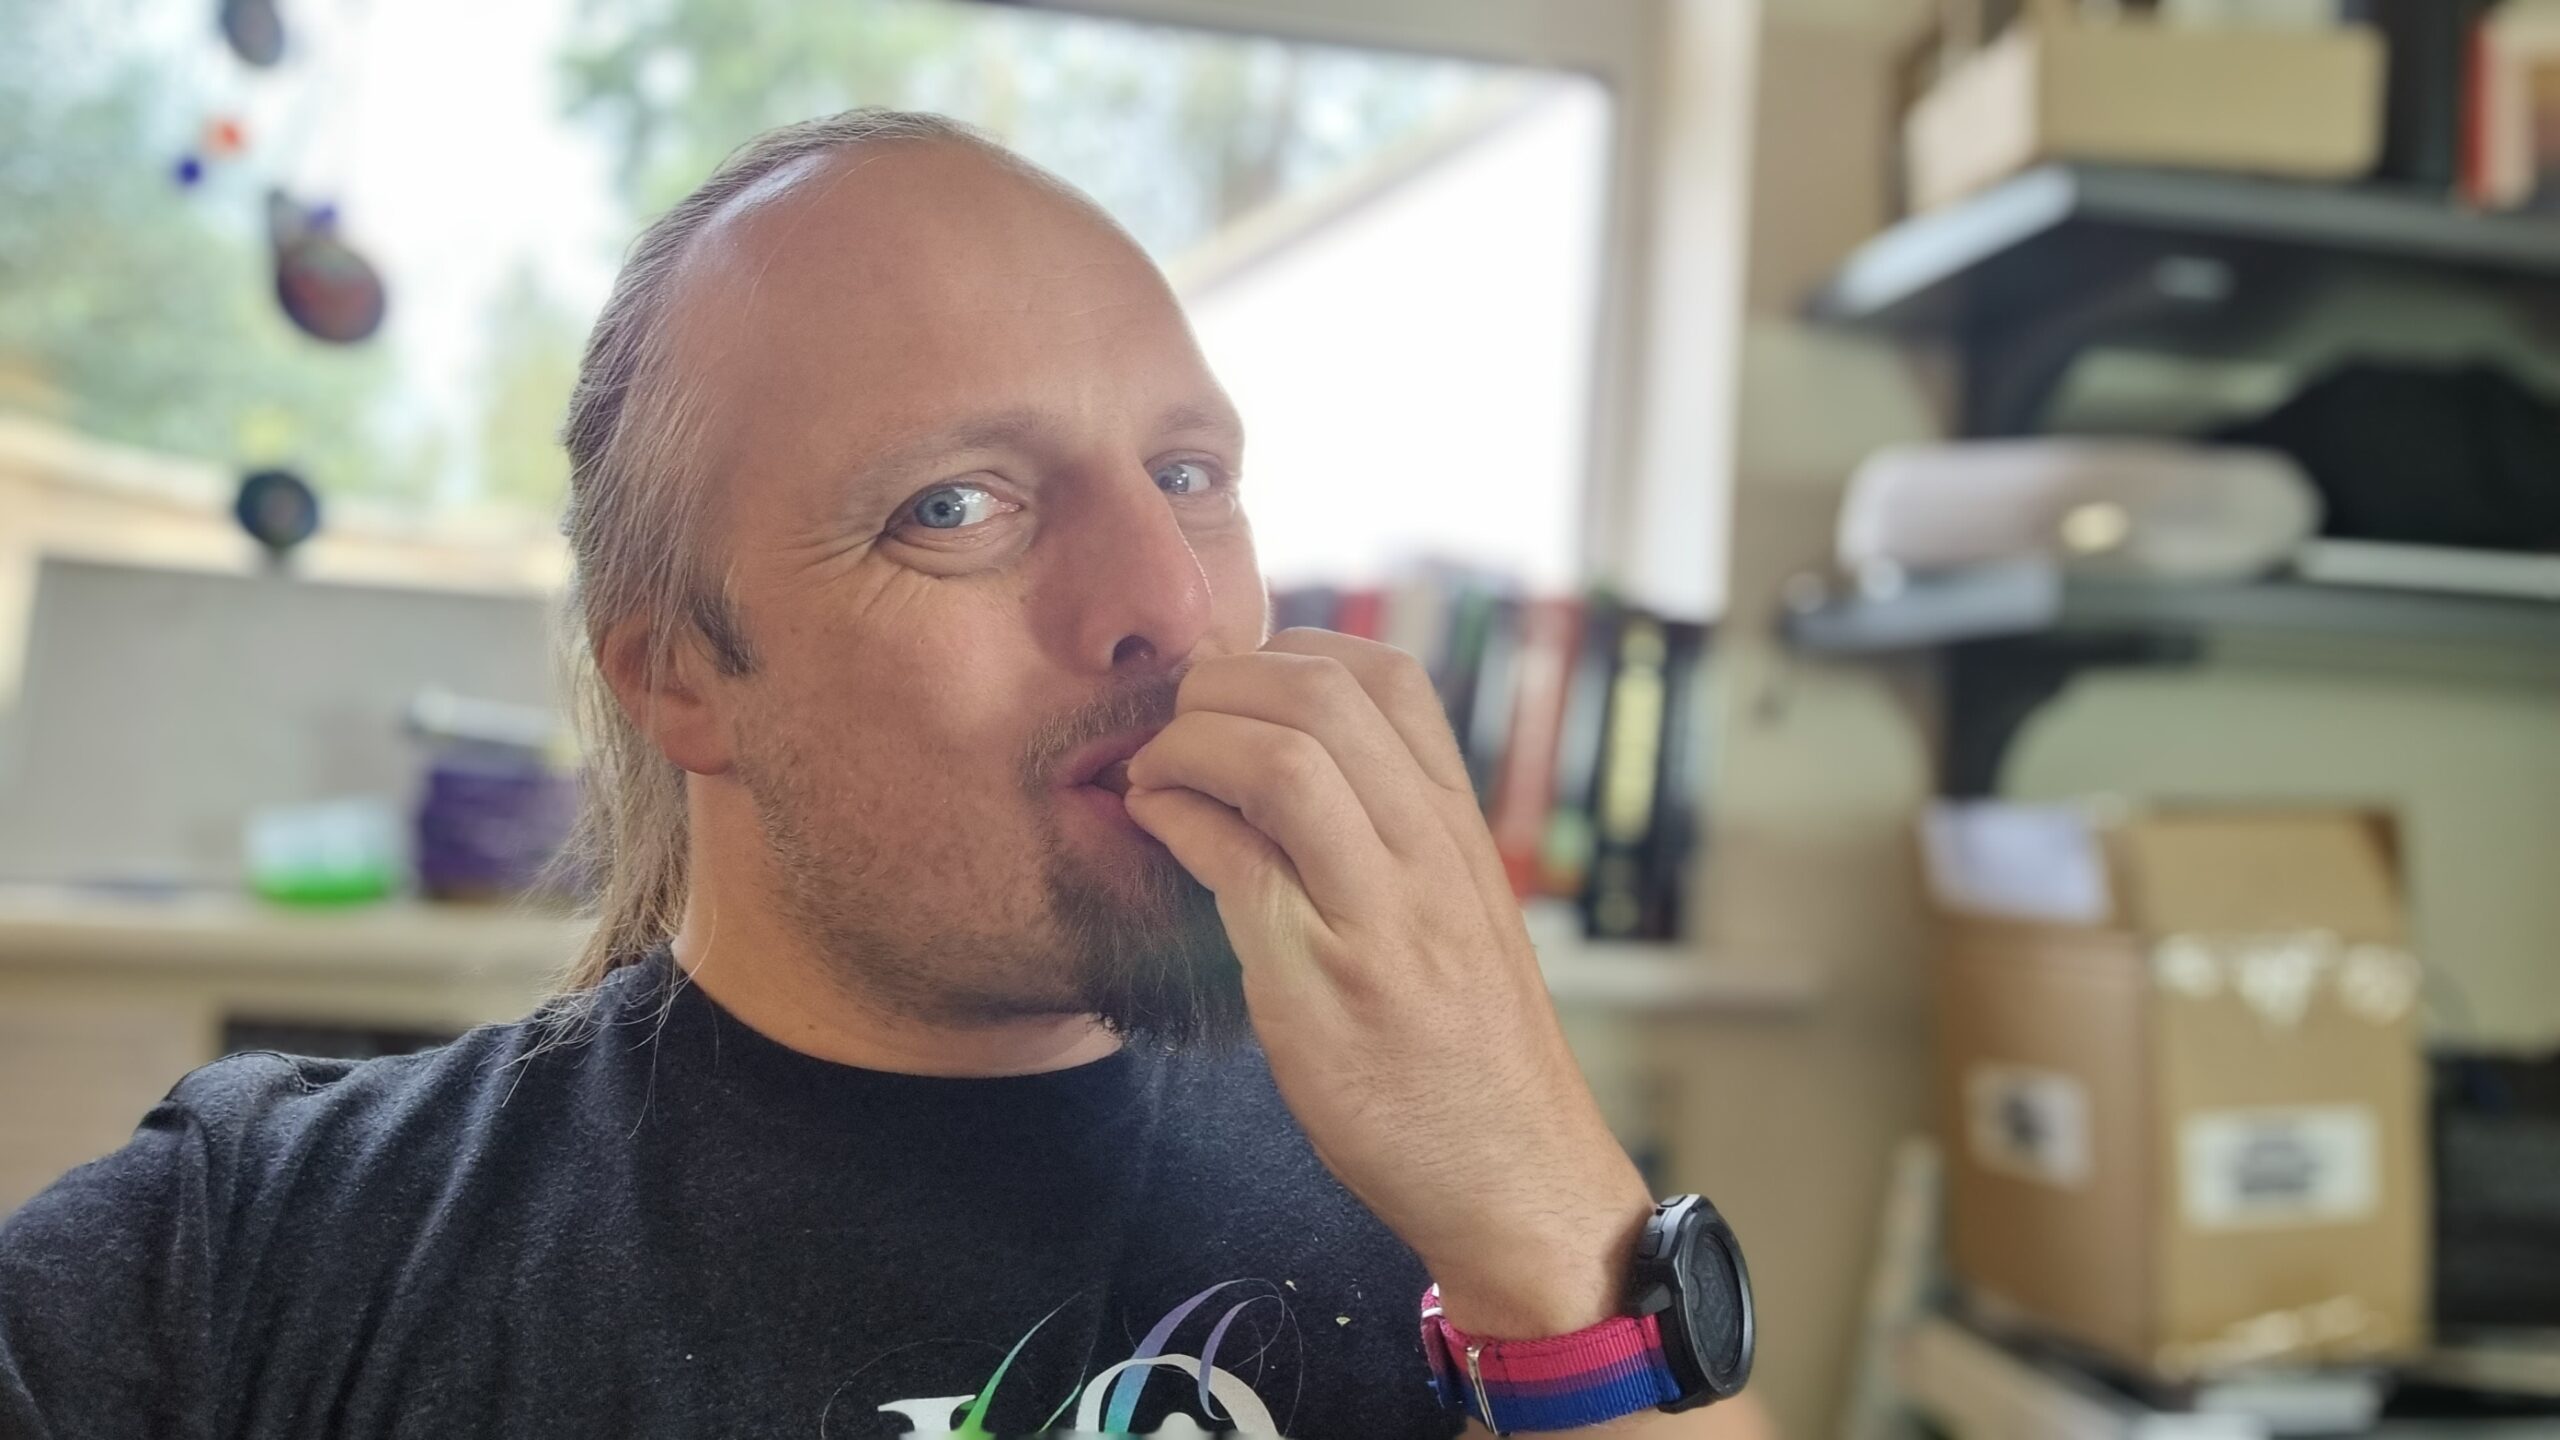 Dan - a white man with long hair tied back and a goatee-style beard - bites into something concealed by his hand (but implied to be a crisp sandwich), which is at his mouth. He's wearing a black t-shirt on which the top part of a swirling rainbow can be made out, and a watch with a "bi pride"-flag coloured watch strap. A window and a cluttered office space are out-of-focus behind him.